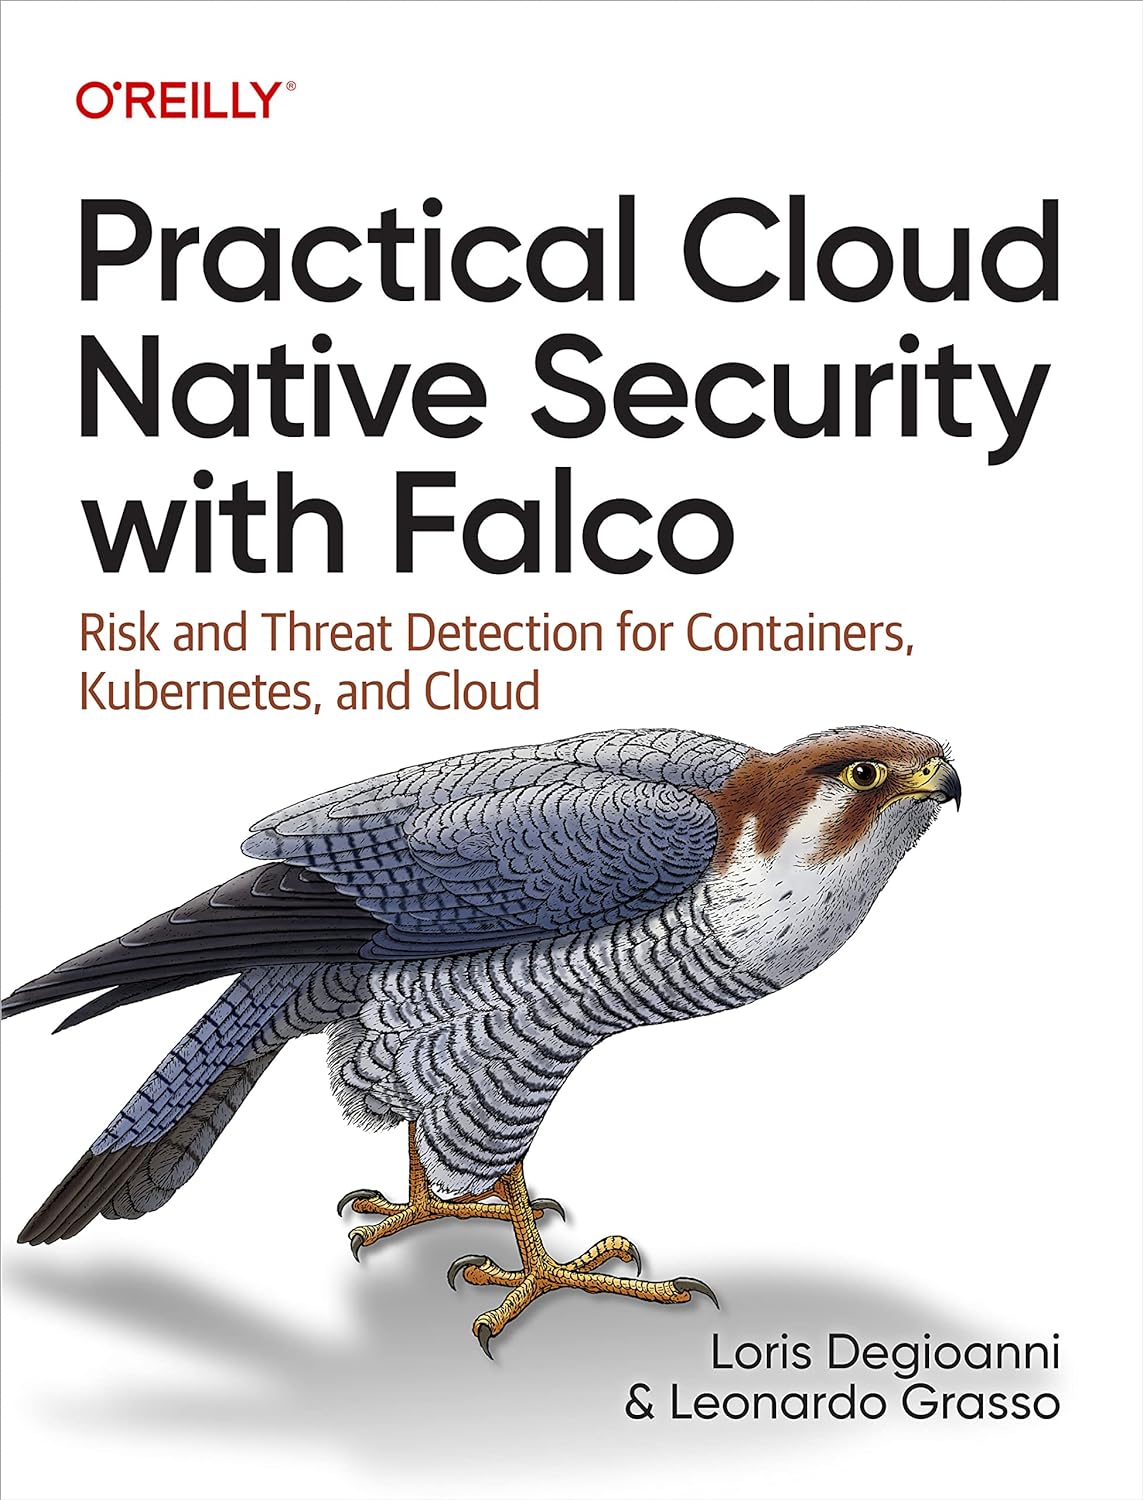 Practical Cloud Native Security with Falco: Risk and Threat Detection for Containers, Kubernetes, and Cloud by Loris Degioanni